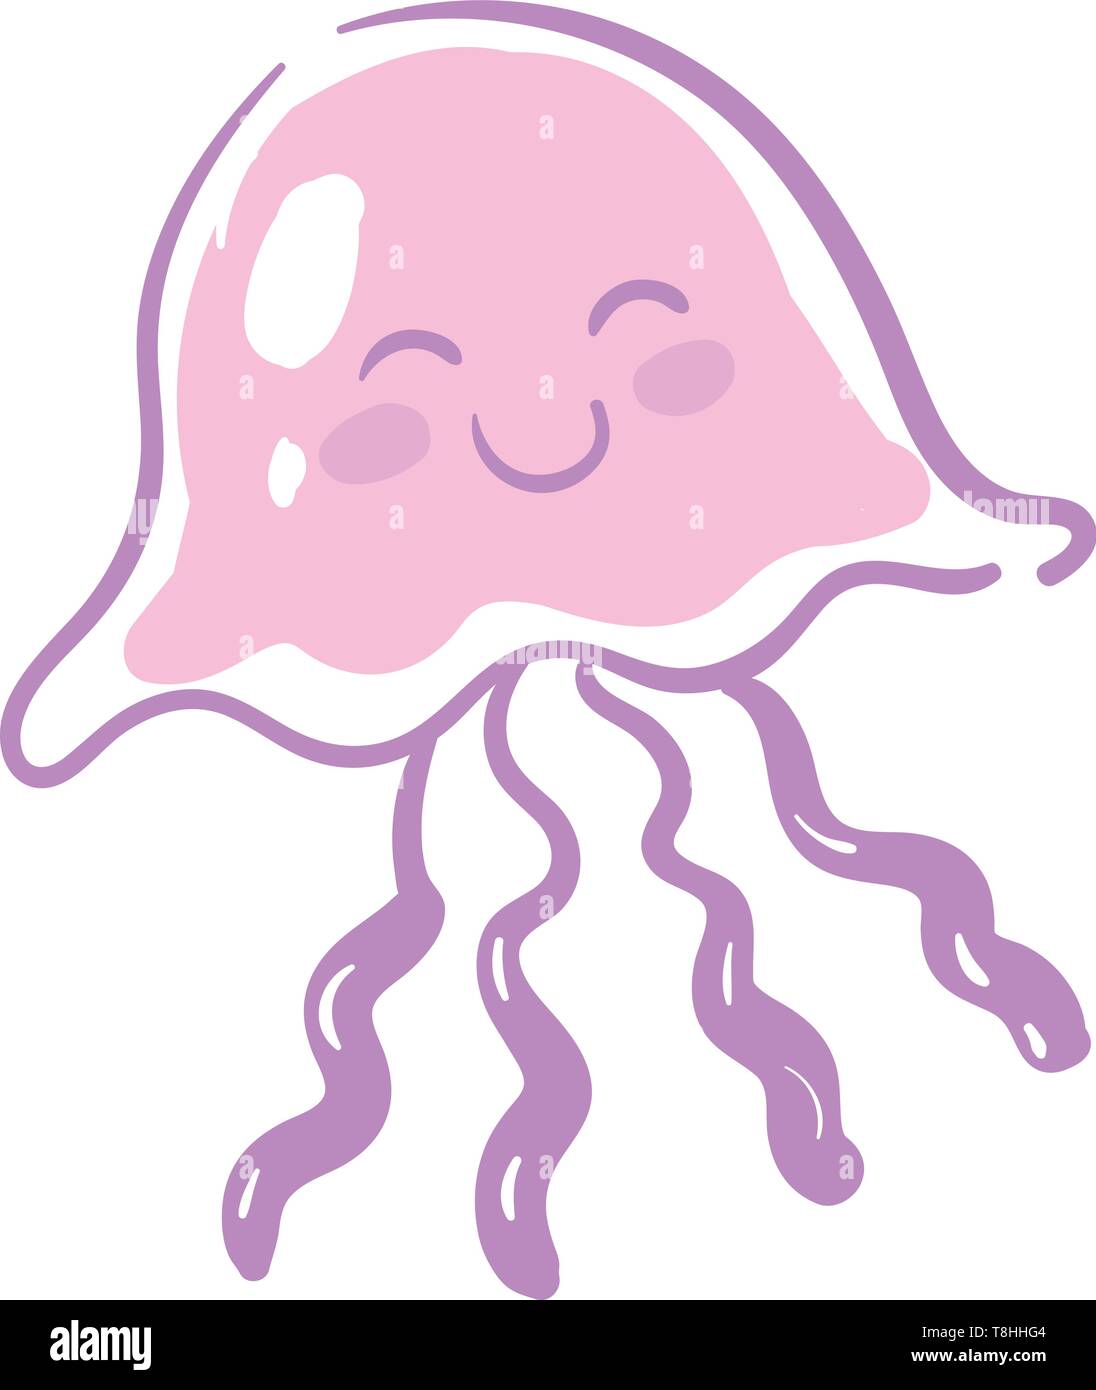 a-happy-pink-jellyfish-with-four-tentacles-vector-color-drawing-or-illustration-T8HHG4.jpg